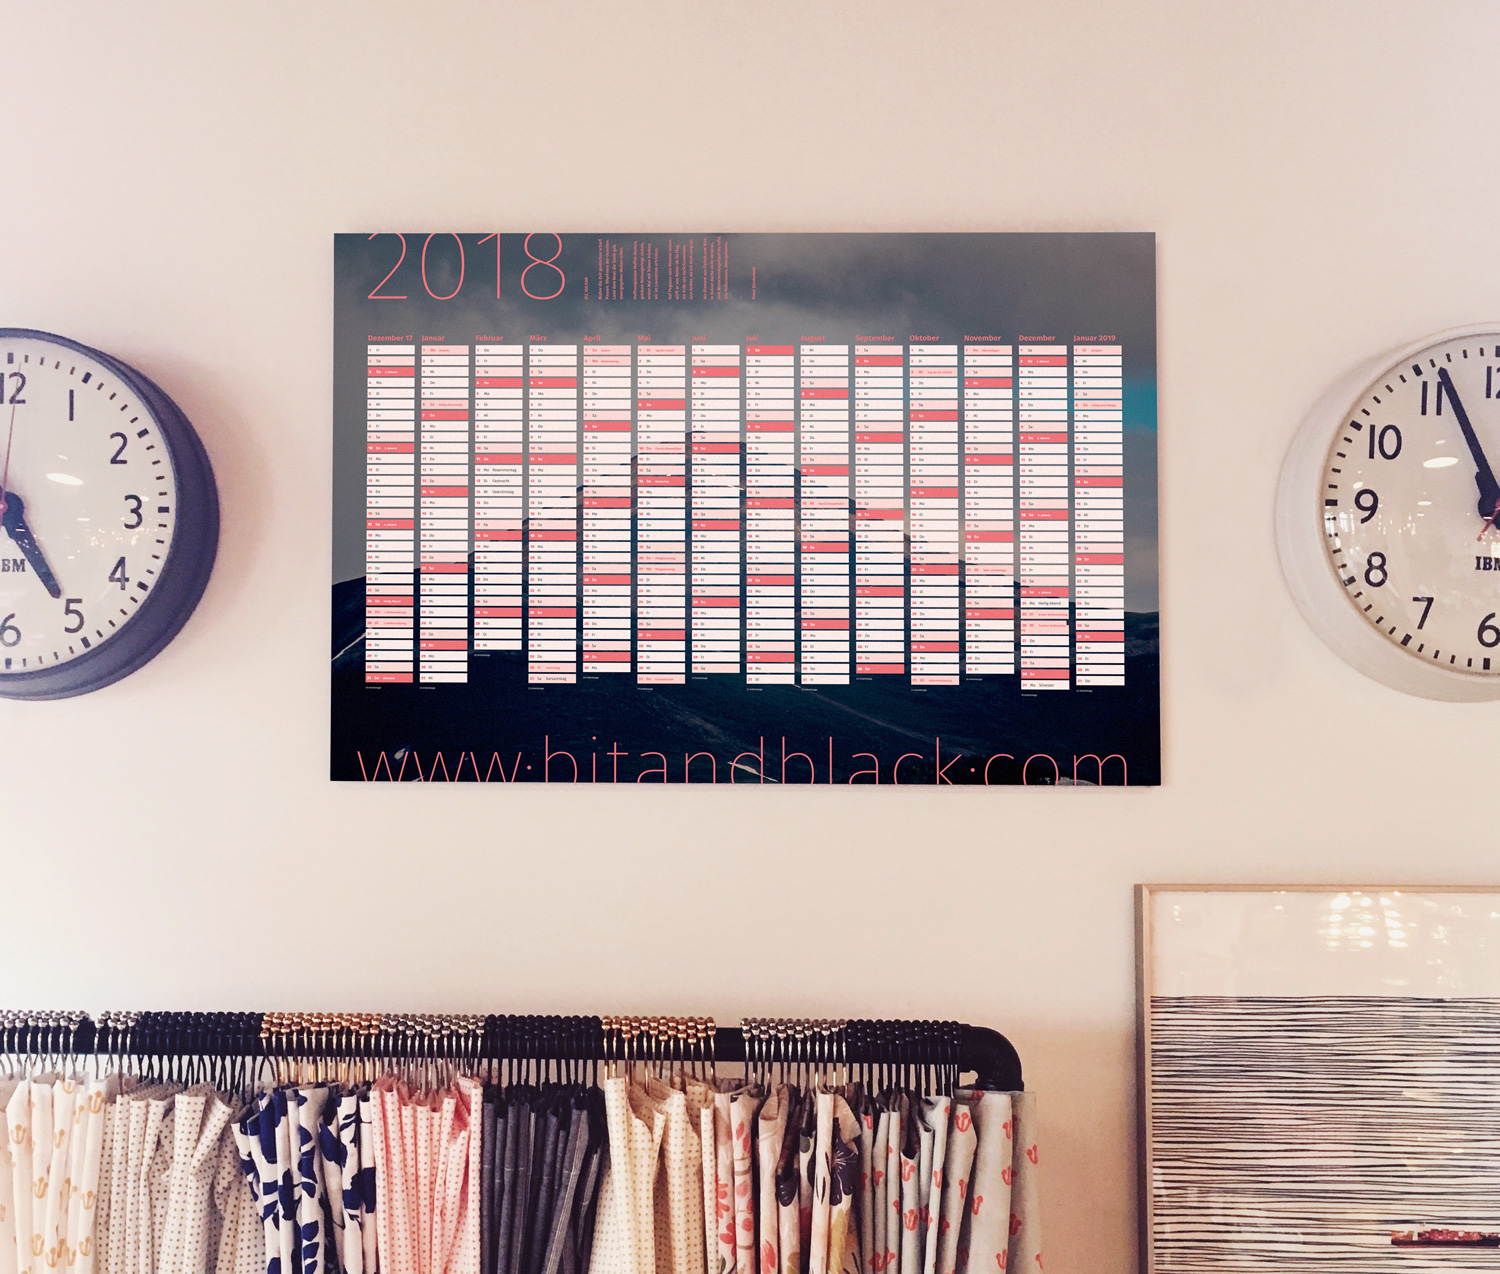 All-year wall calendar in German language. It has been set in five colors in Fira Sans and includes day digits and names, the names of German holidays and the number of working days per month